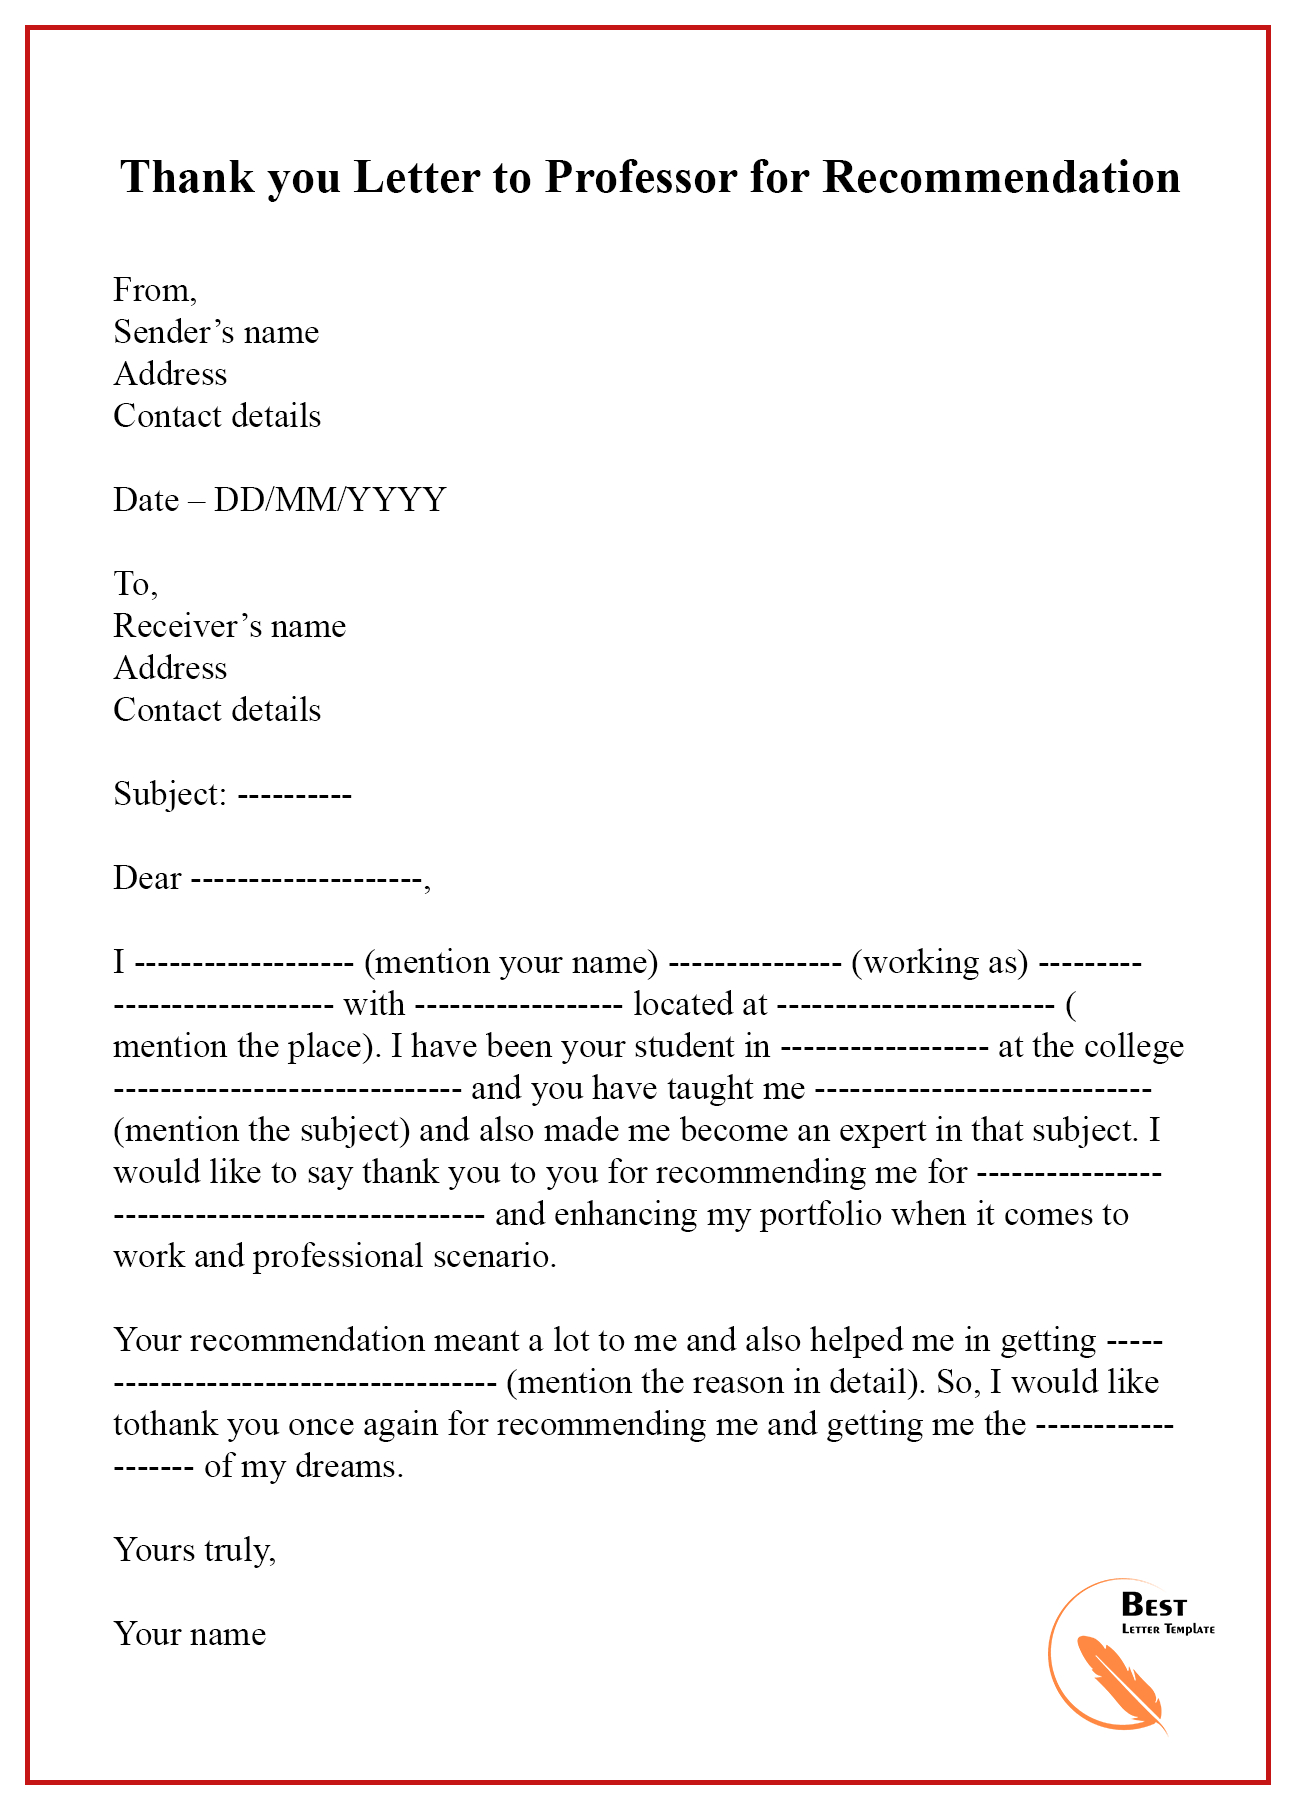 how to write a letter to a professor for research